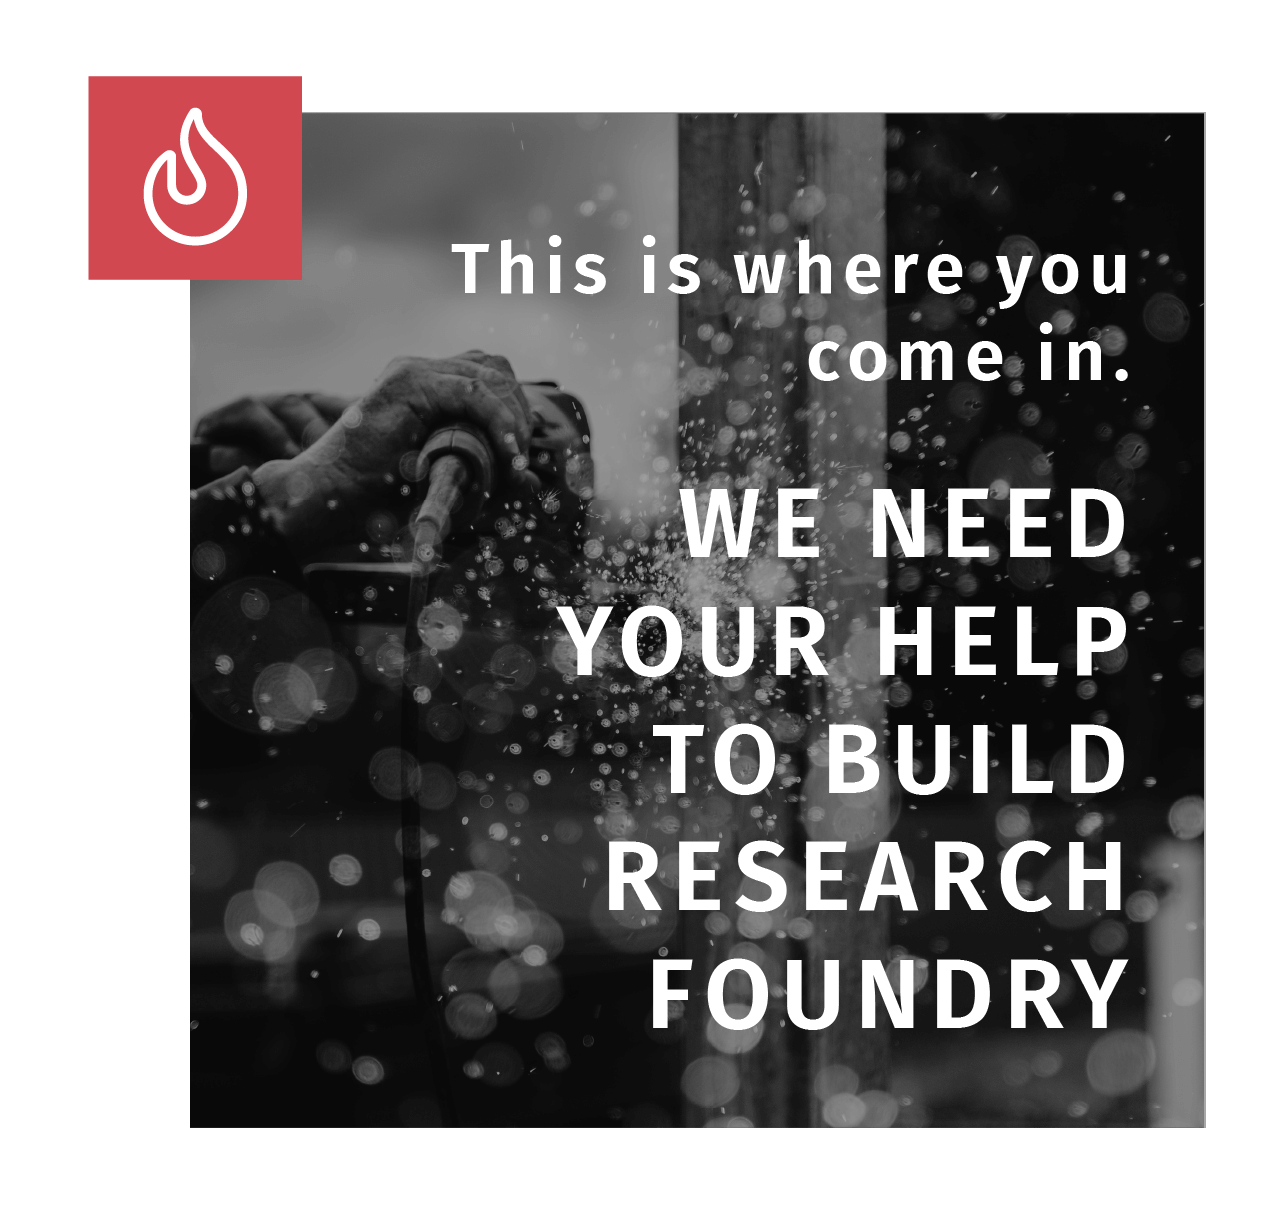 This is where you come in. We need your help to build Research Foundry.